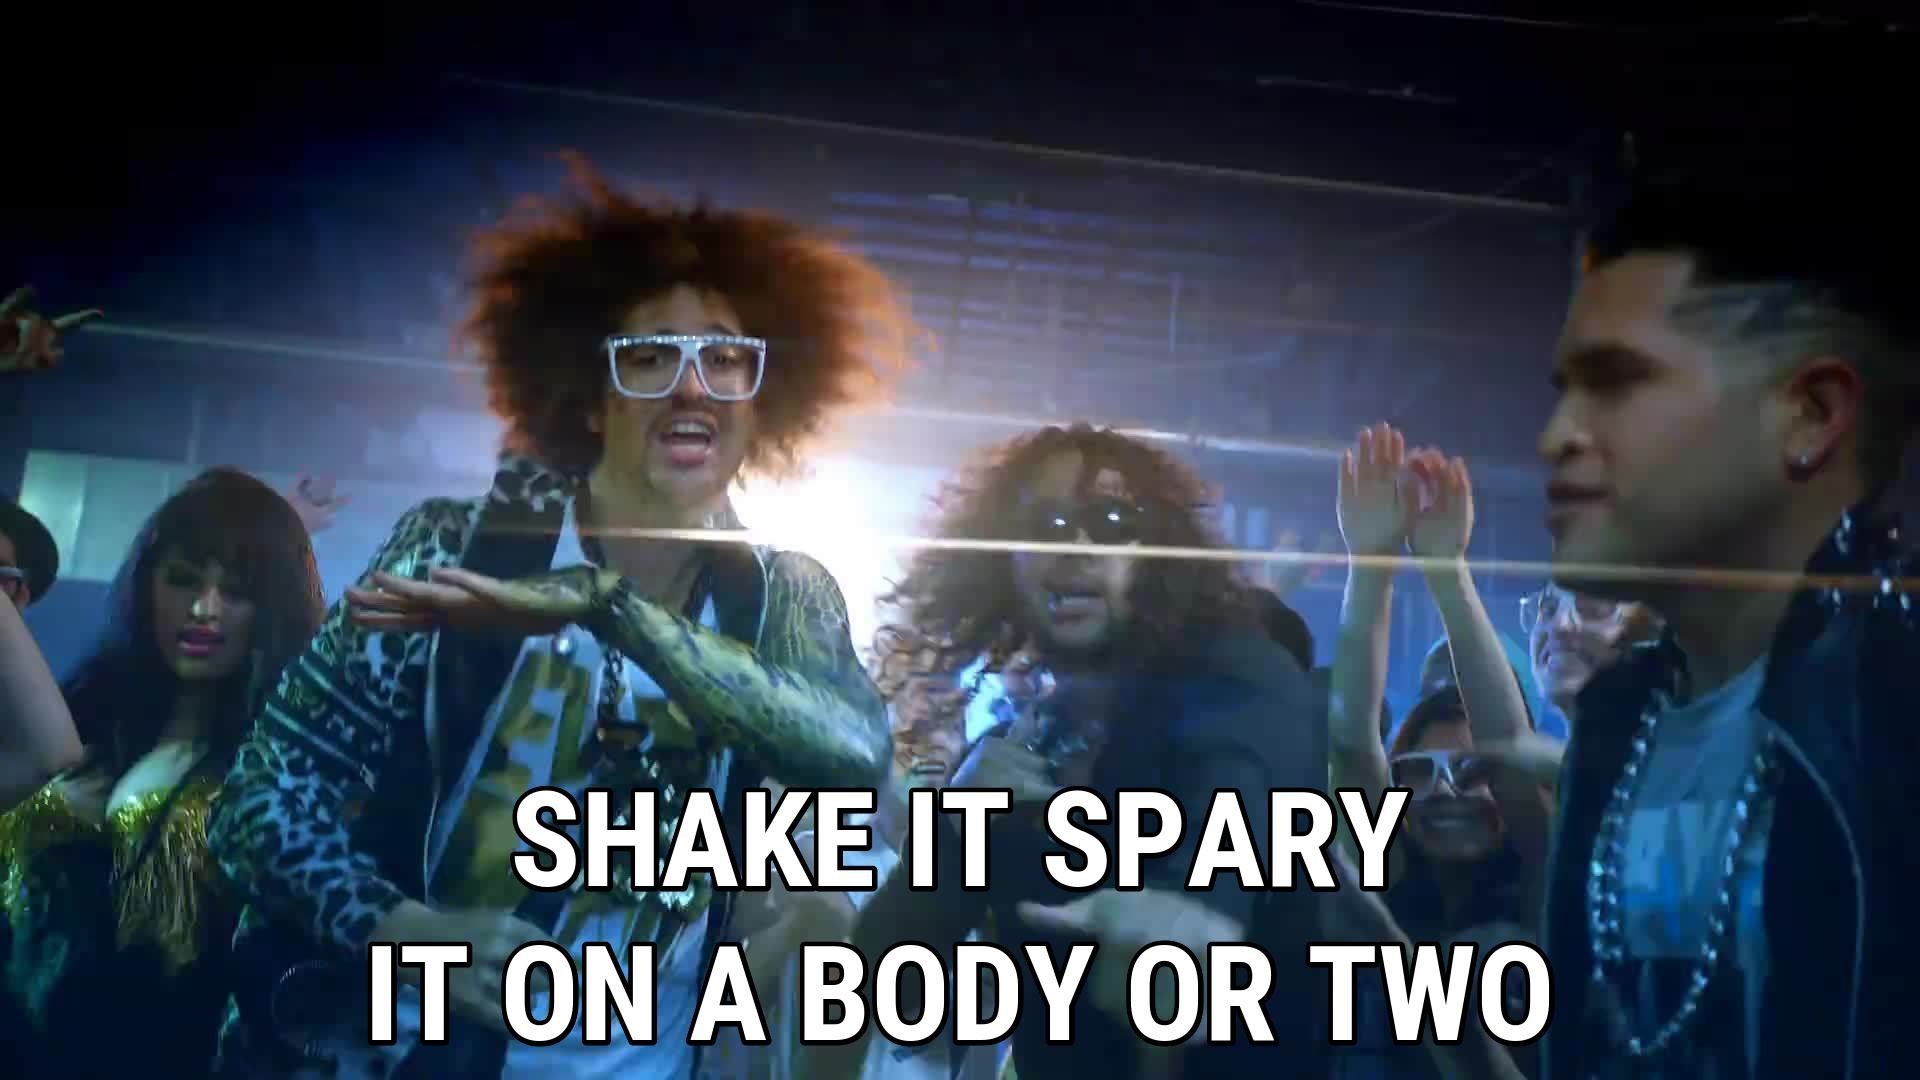 1920x1080 Shake it spary it on a body or two